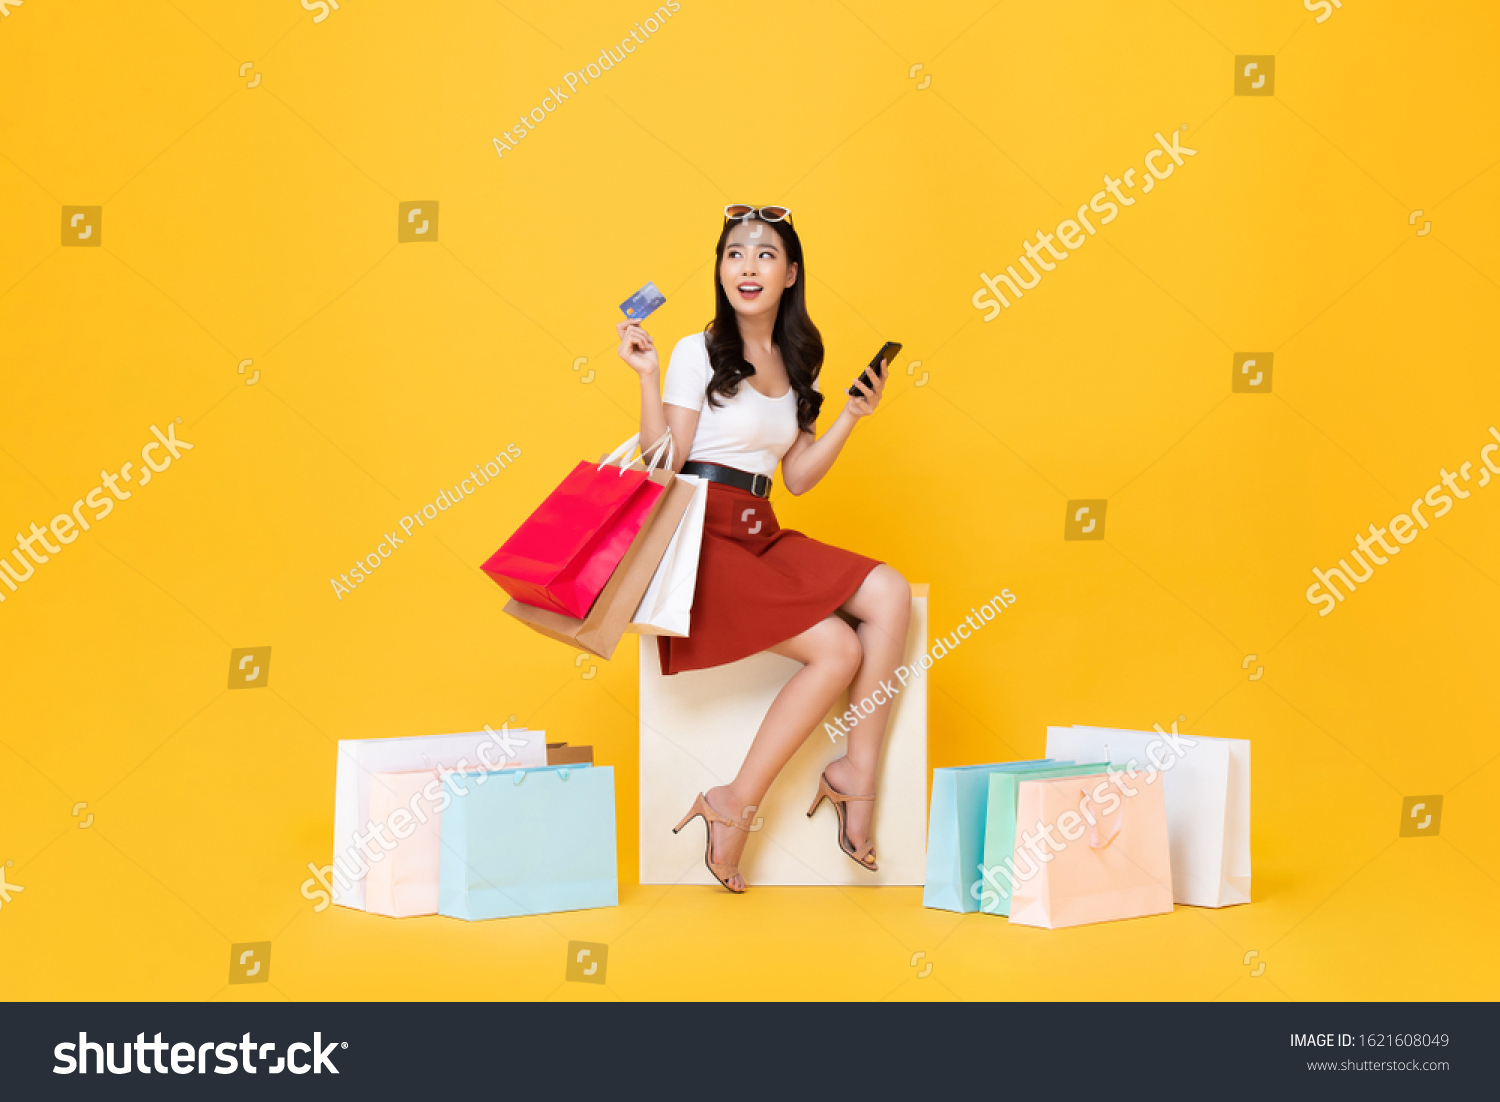 Beautiful Asian woman sitting and carrying shopping bags with credit card and mobile phone in hands on yellow background #1621608049